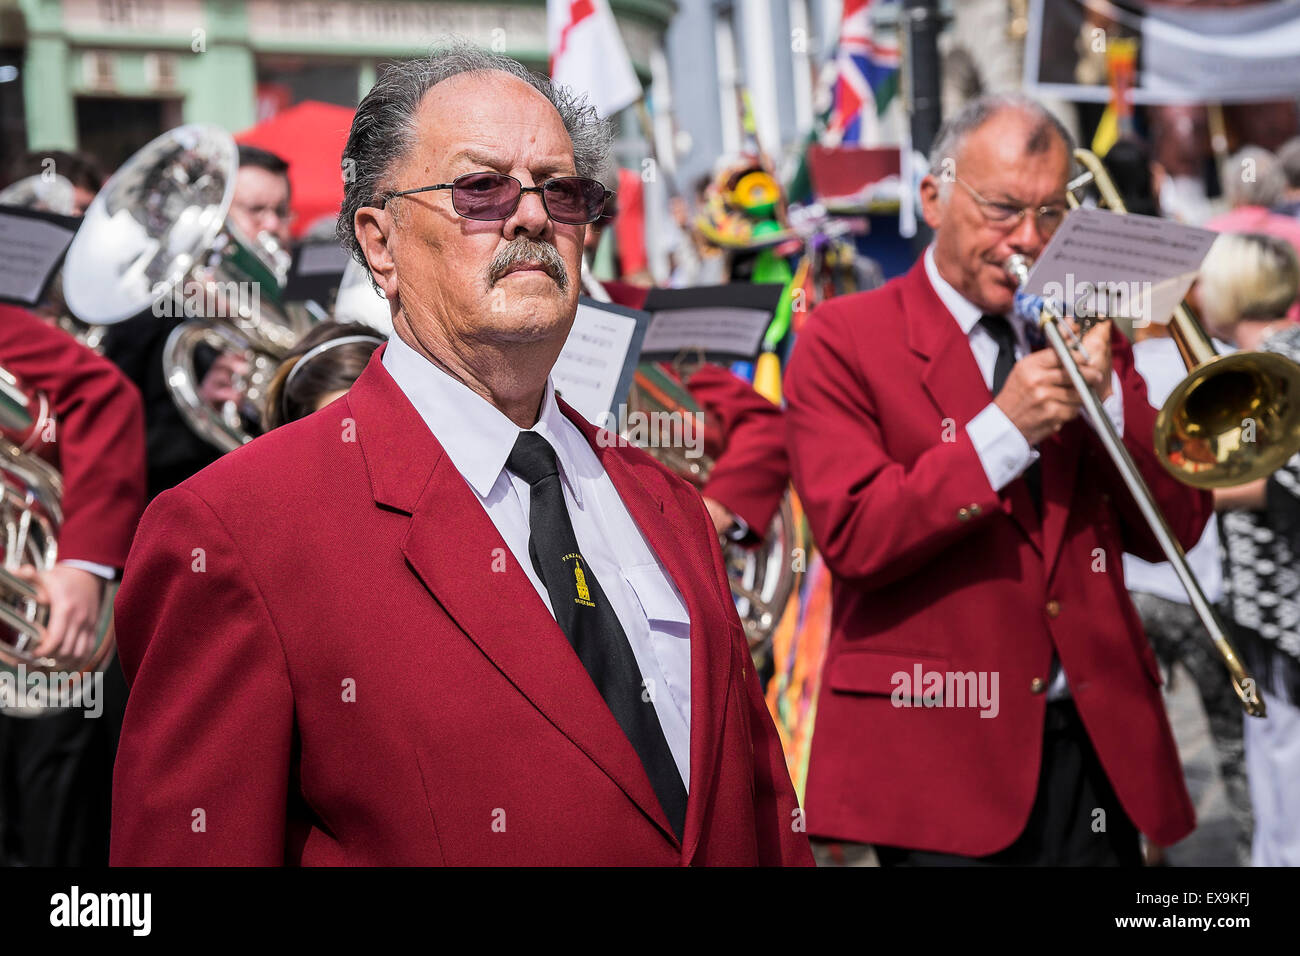 The Penzance Silver Band marching in one of the colourful parades on Mazey Day, part of the Golowan Festival in Penzance, Cornwa Stock Photo